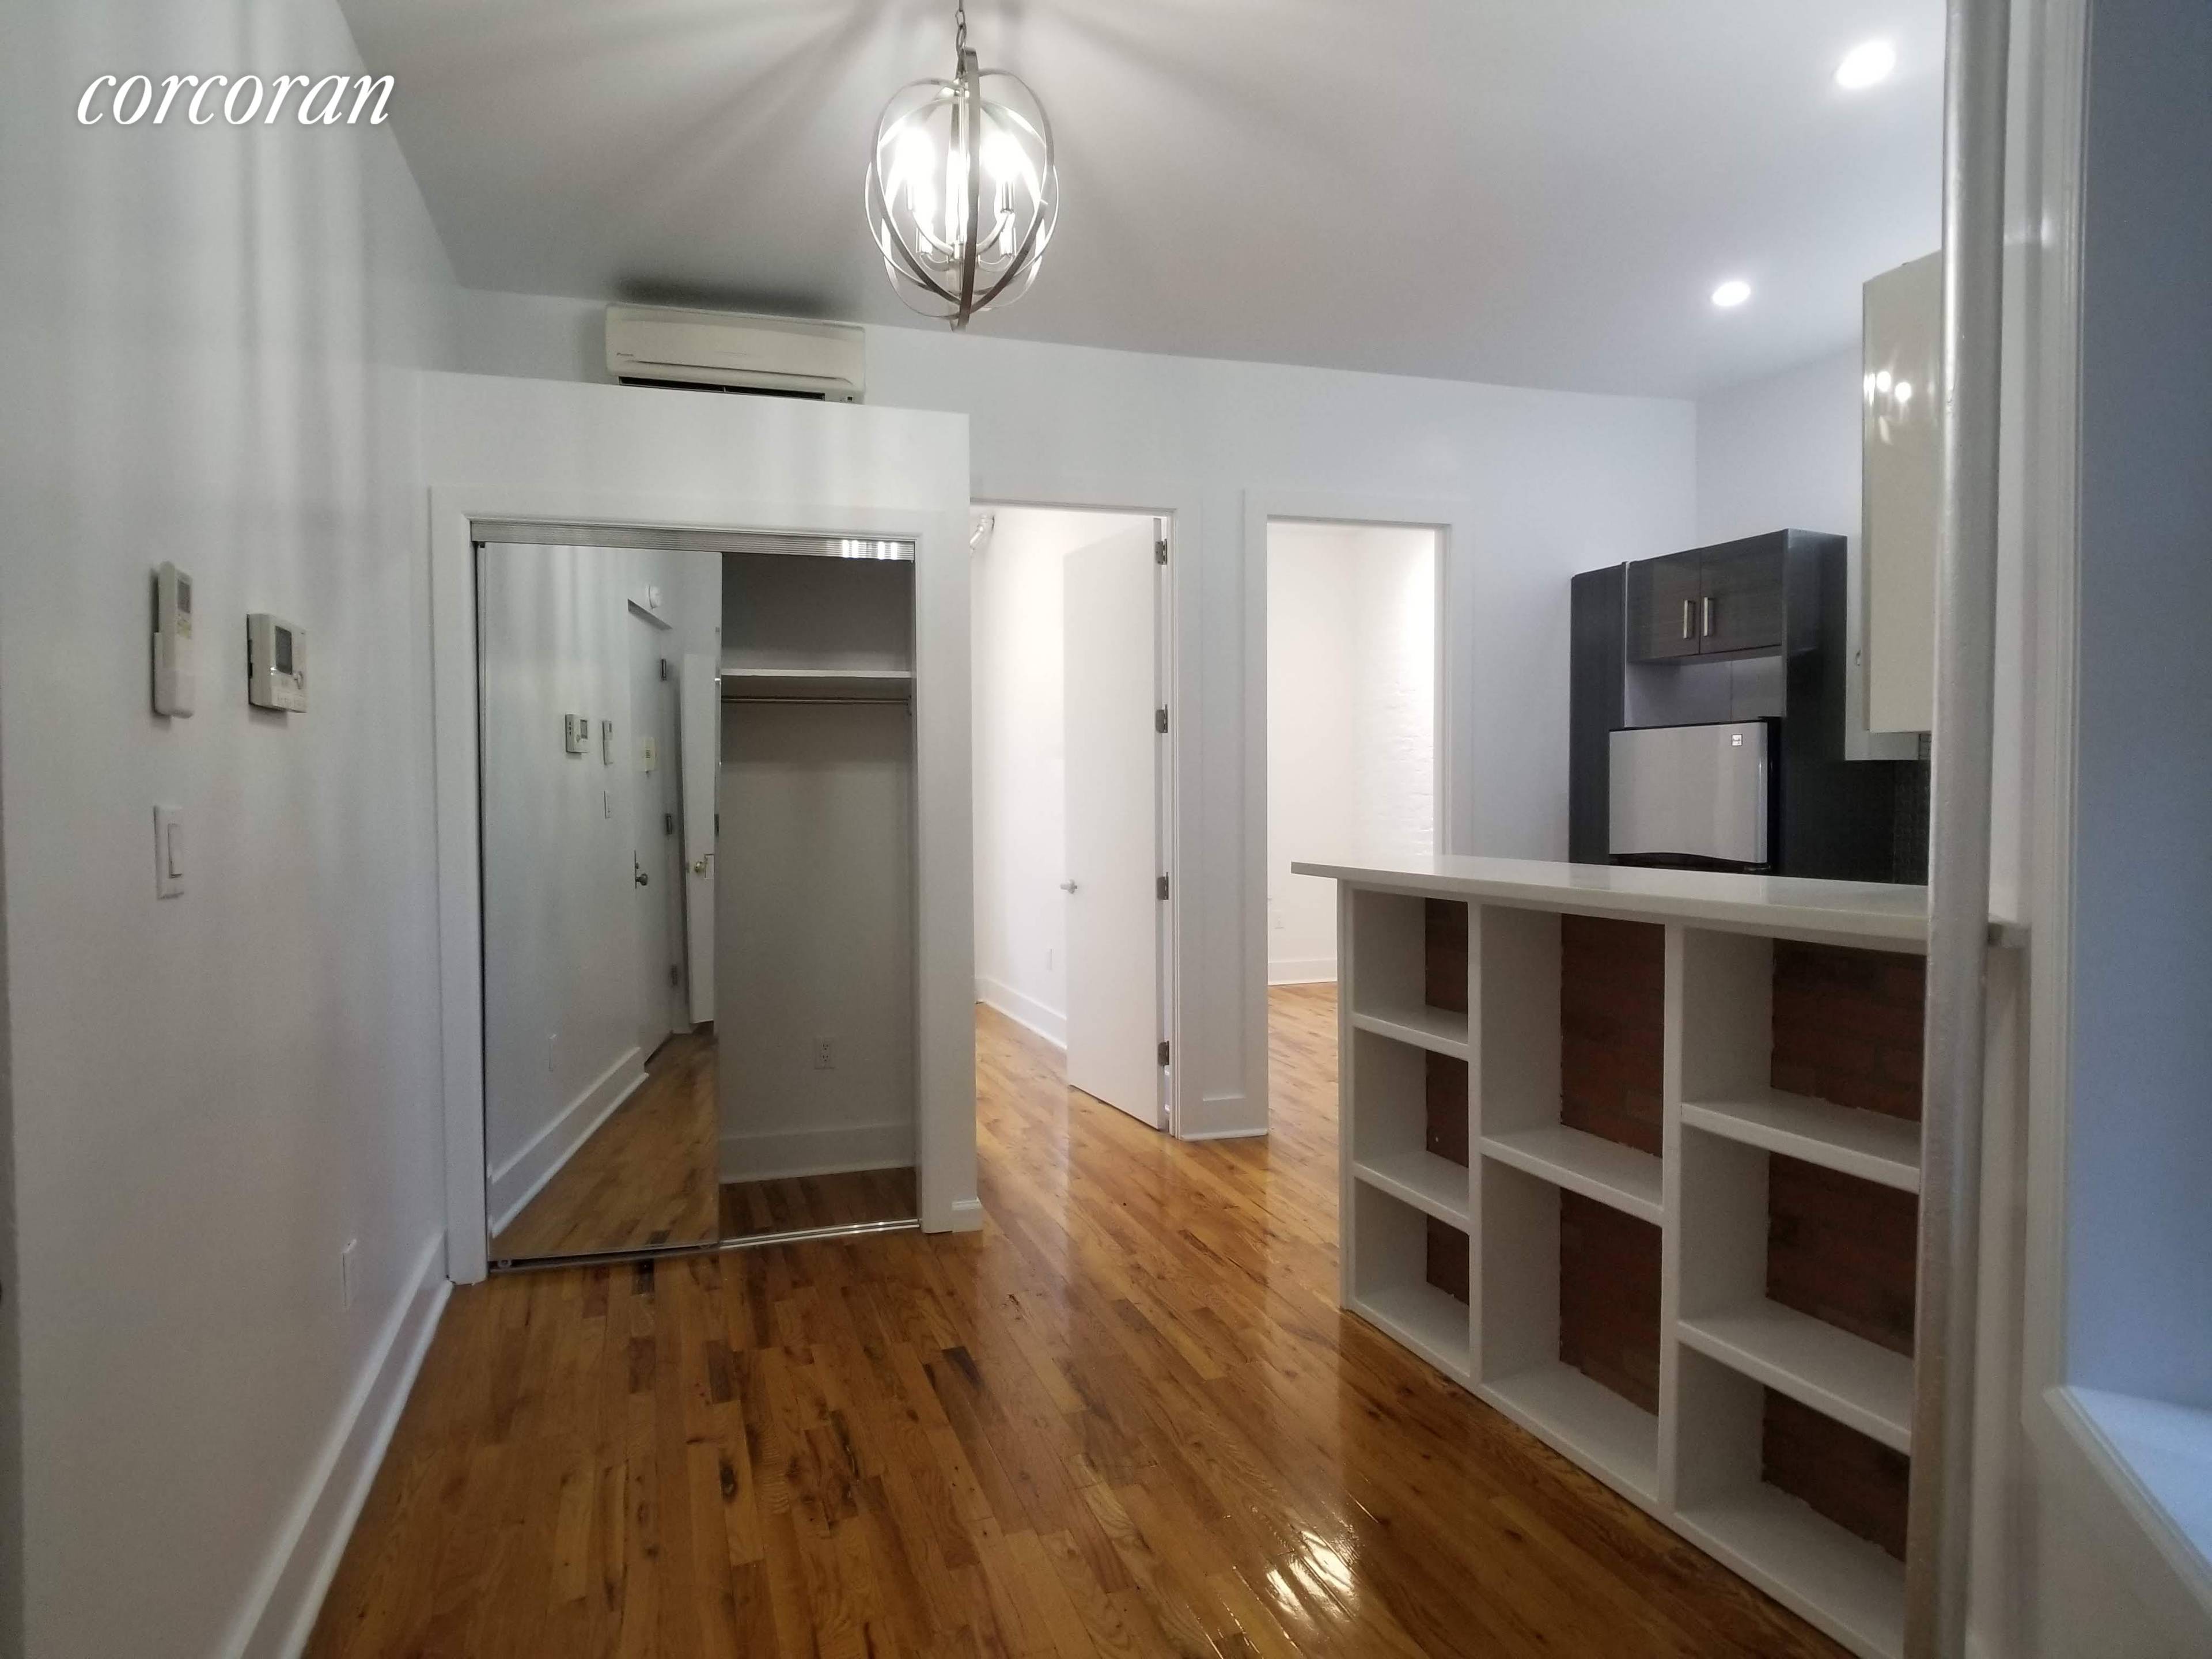 NOW WITH NO FEE Charming 2 bedroom apartment is on Metropolitan Avenue and conveniently located directly across the street from the L and G train at Lorimer.